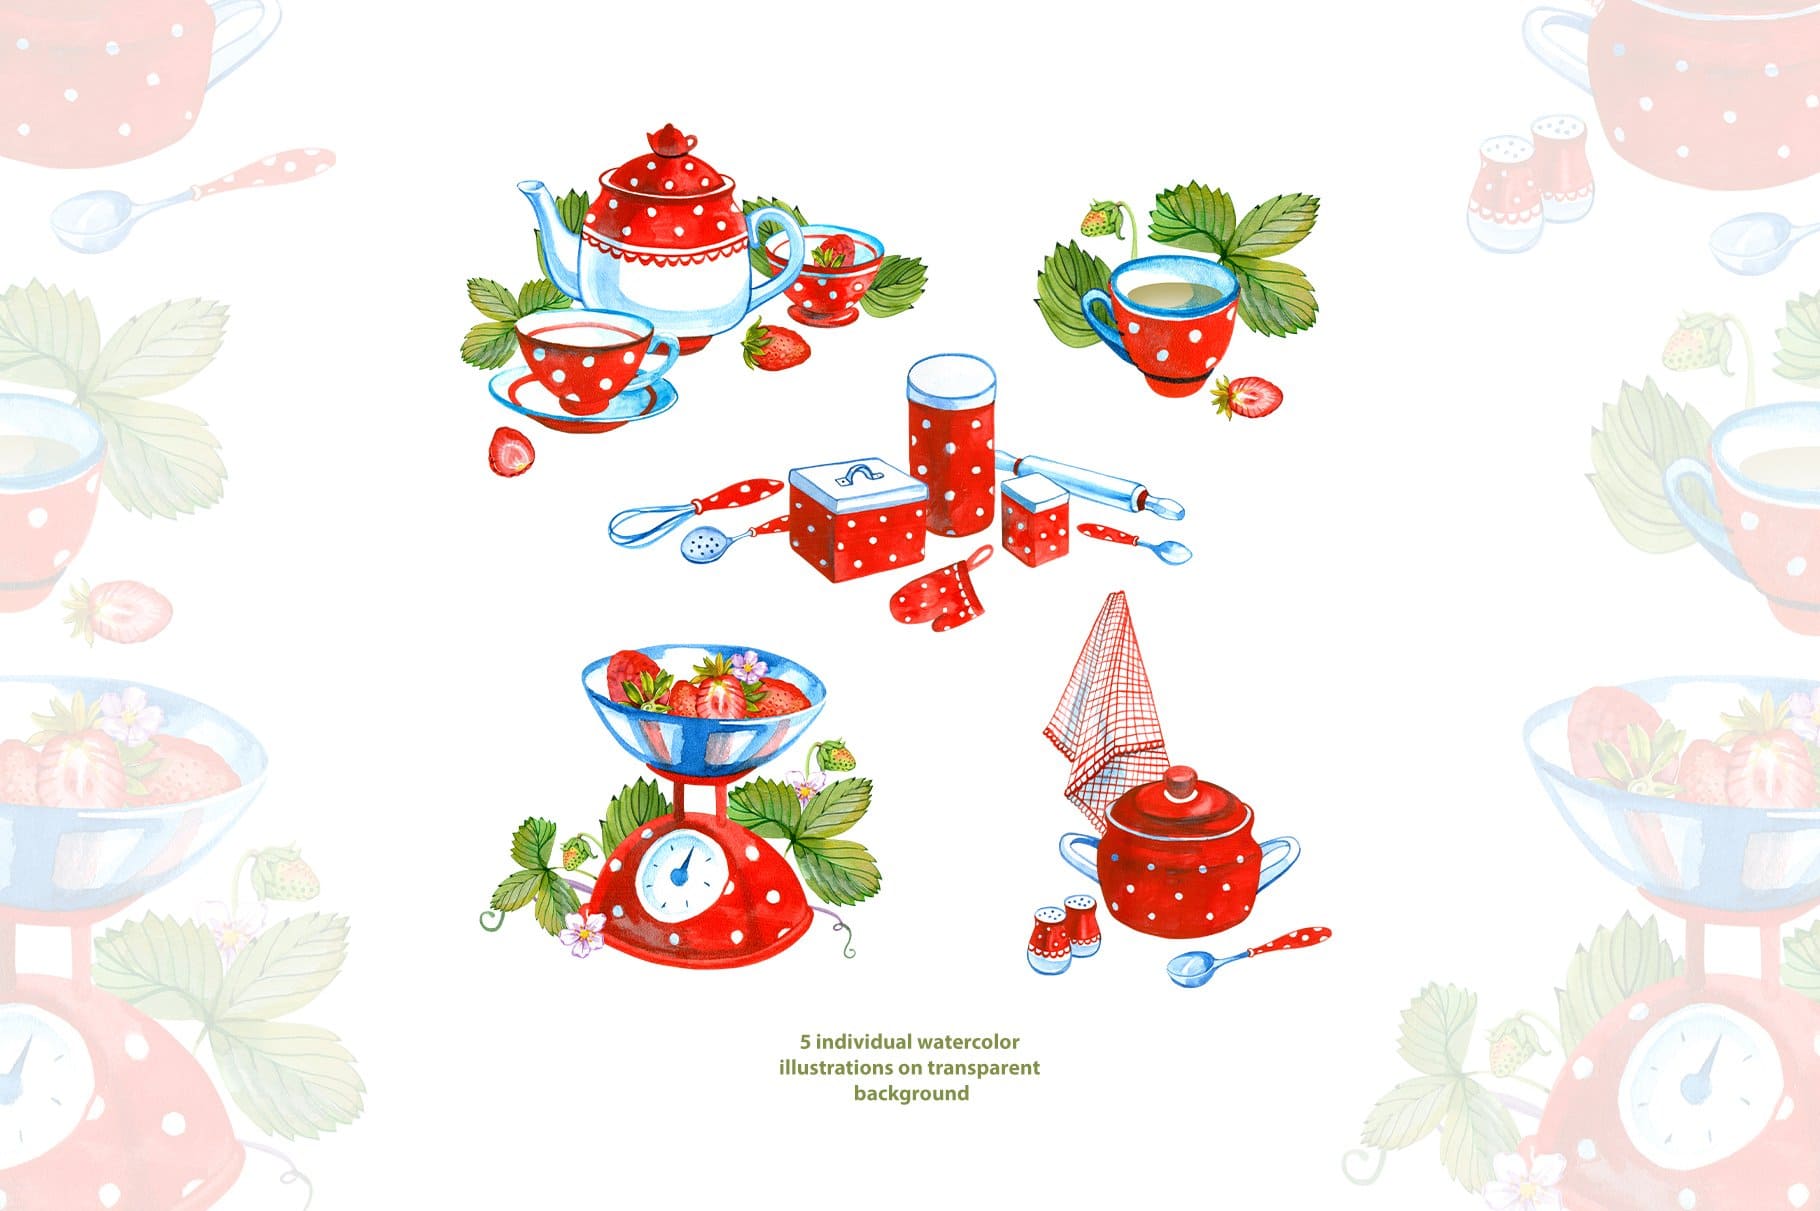 A strawberry kitchen consists of a kettle, cups, plates and other tools.